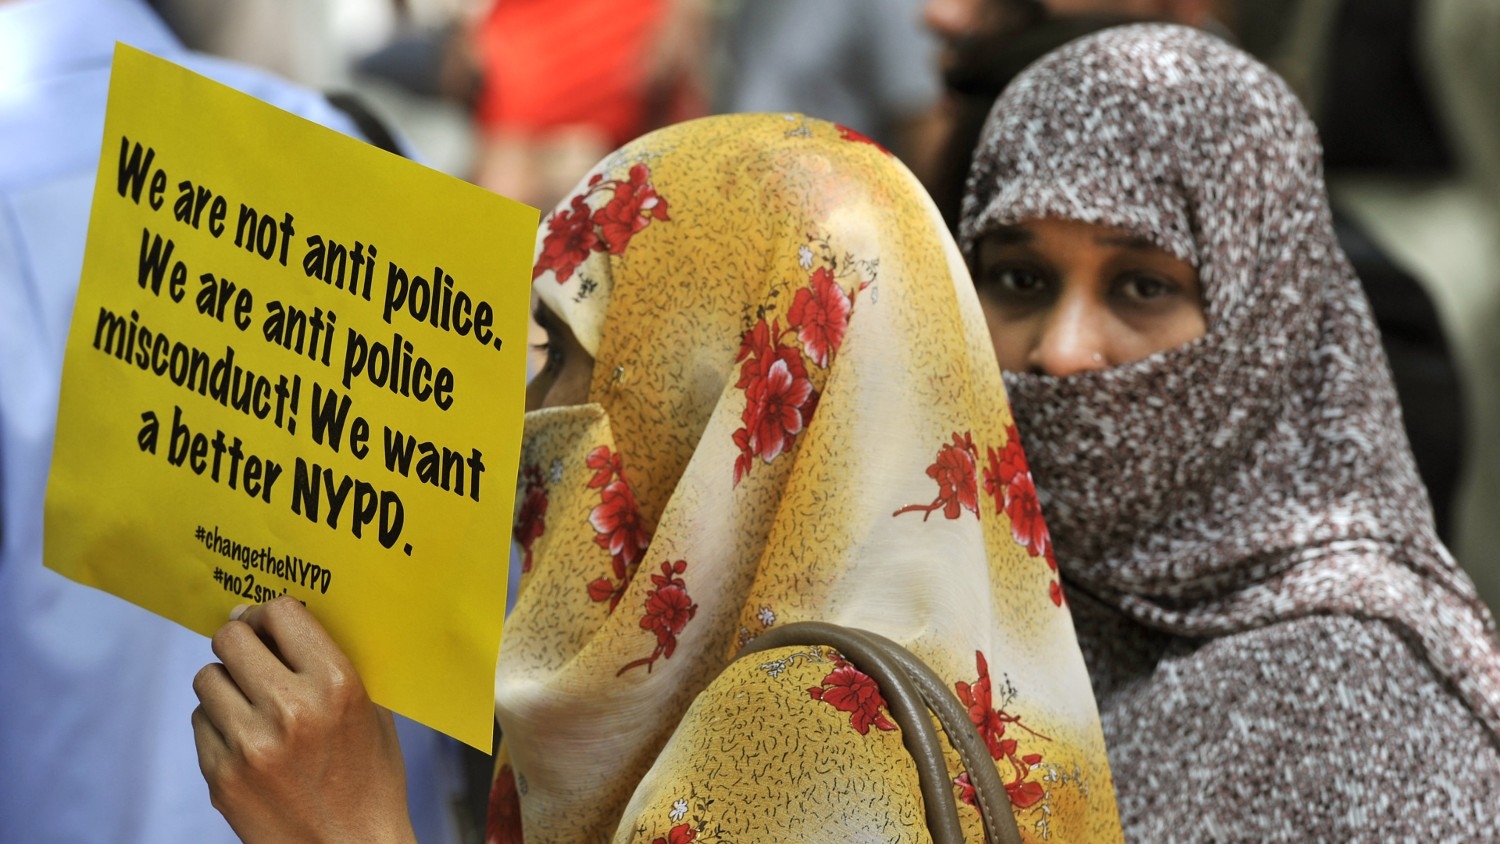 Muslim women hold a sign during a press conference on 18 June 2013 in New York to discuss planned legal action challenging the city police department's surveillance of businesses frequented by Muslims.